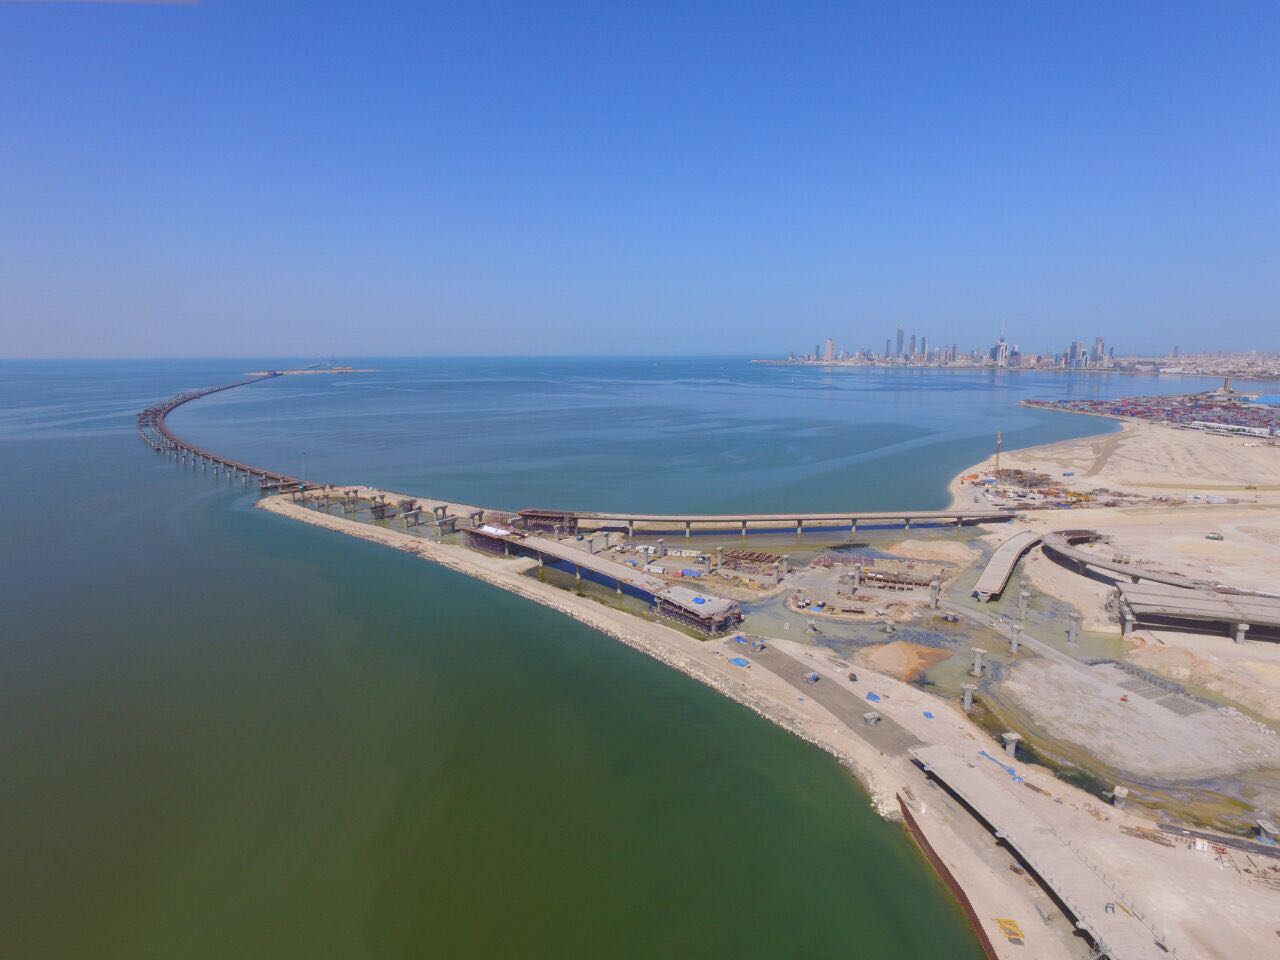 79 pct of Sheikh Jaber Al-Ahmad Causeway completed